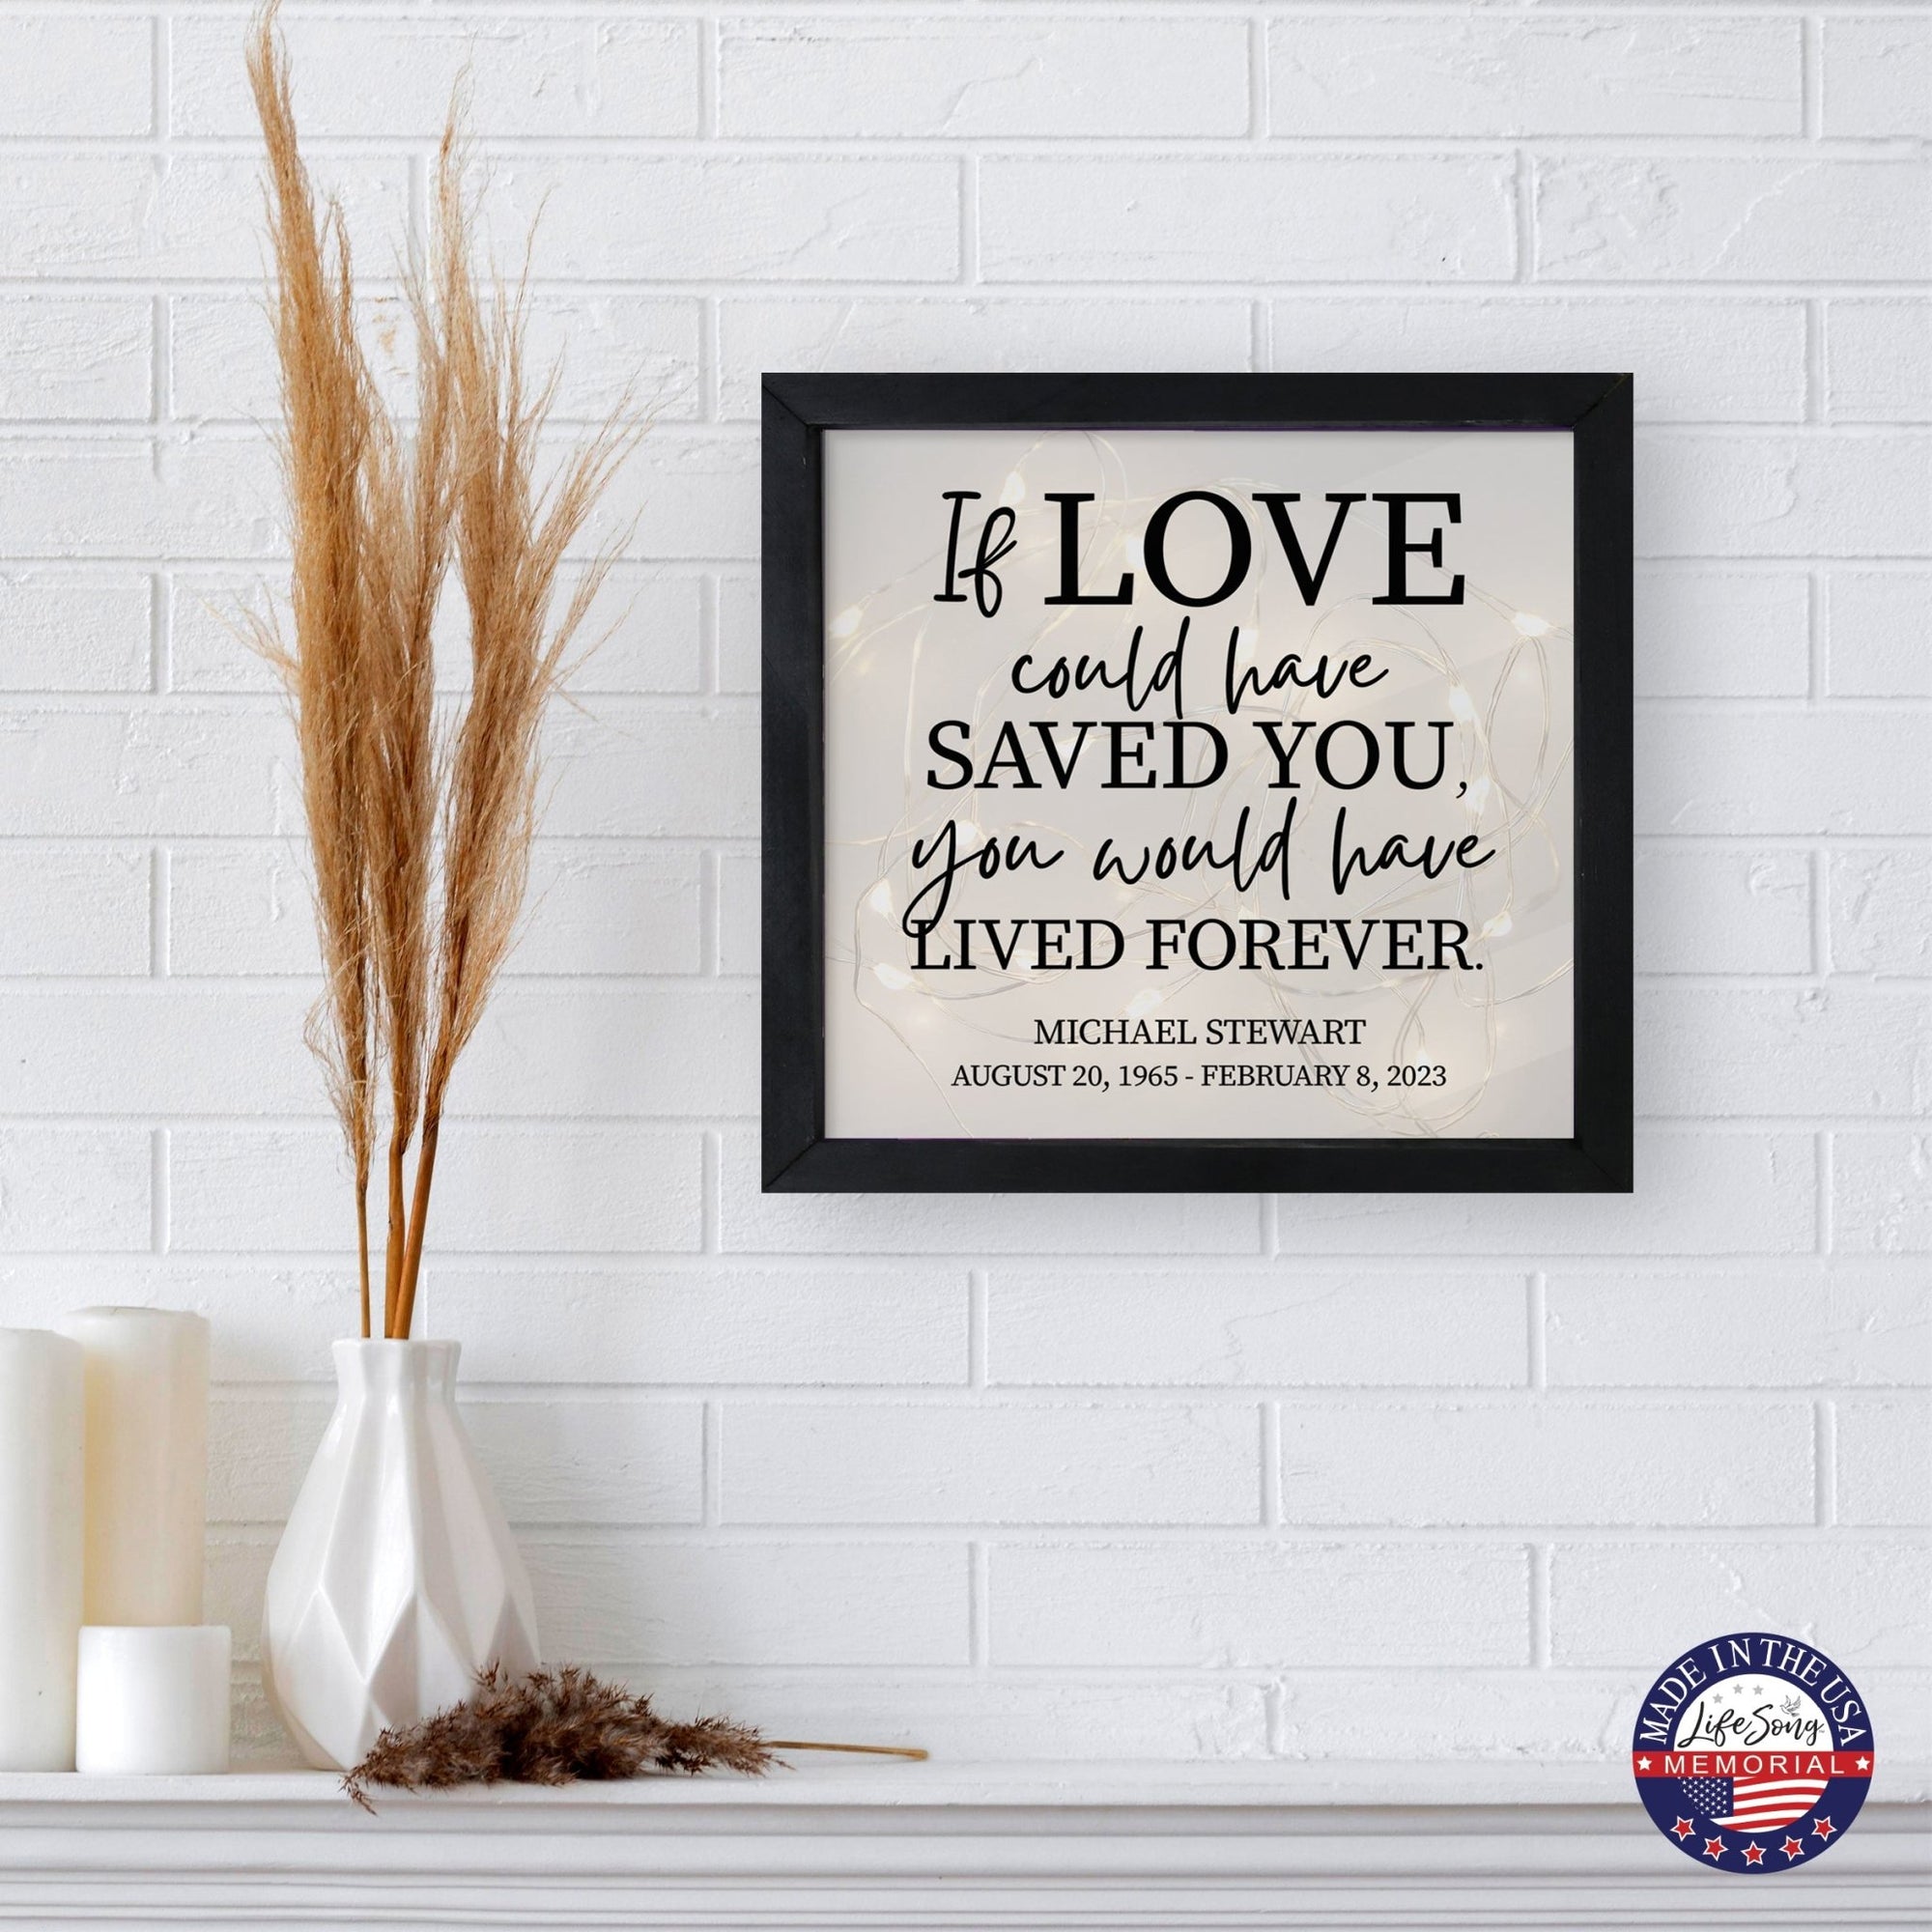 Personalized Memorial Black Framed Shadow Box With Lights Sympathy Gift Wall Décor - If Love Could Have Saved You - LifeSong Milestones